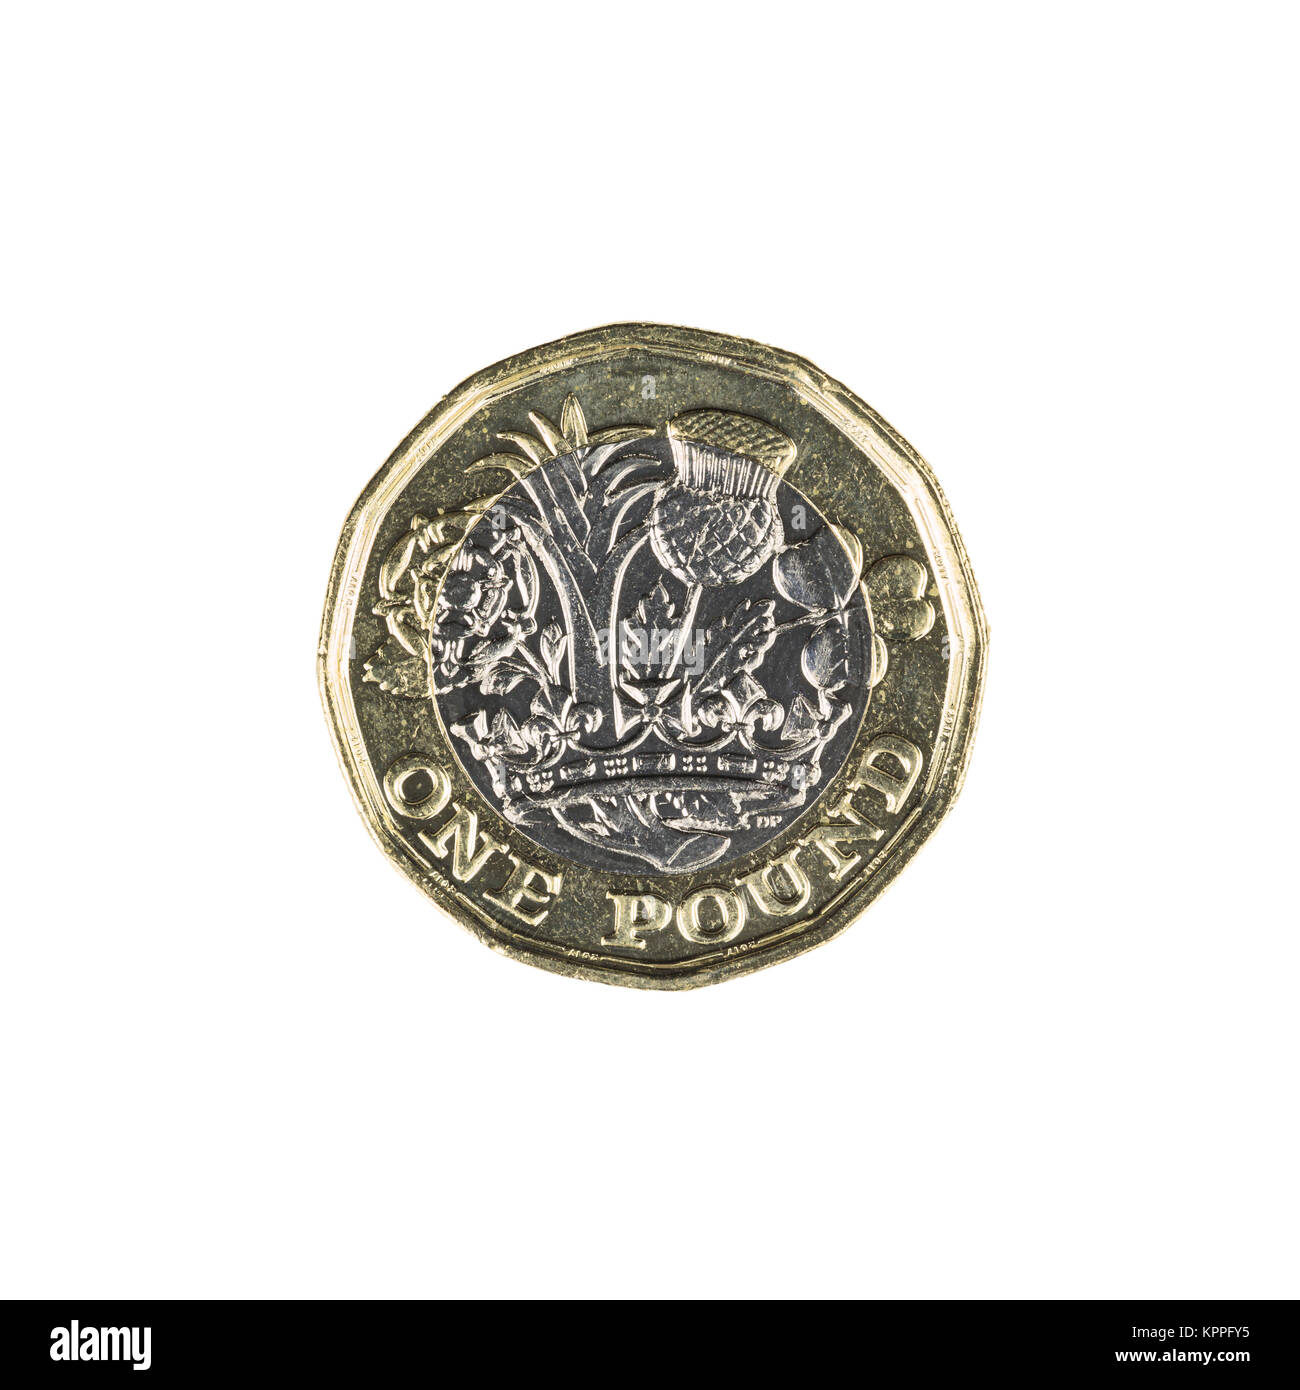 British one pound sterling coin Stock Photo